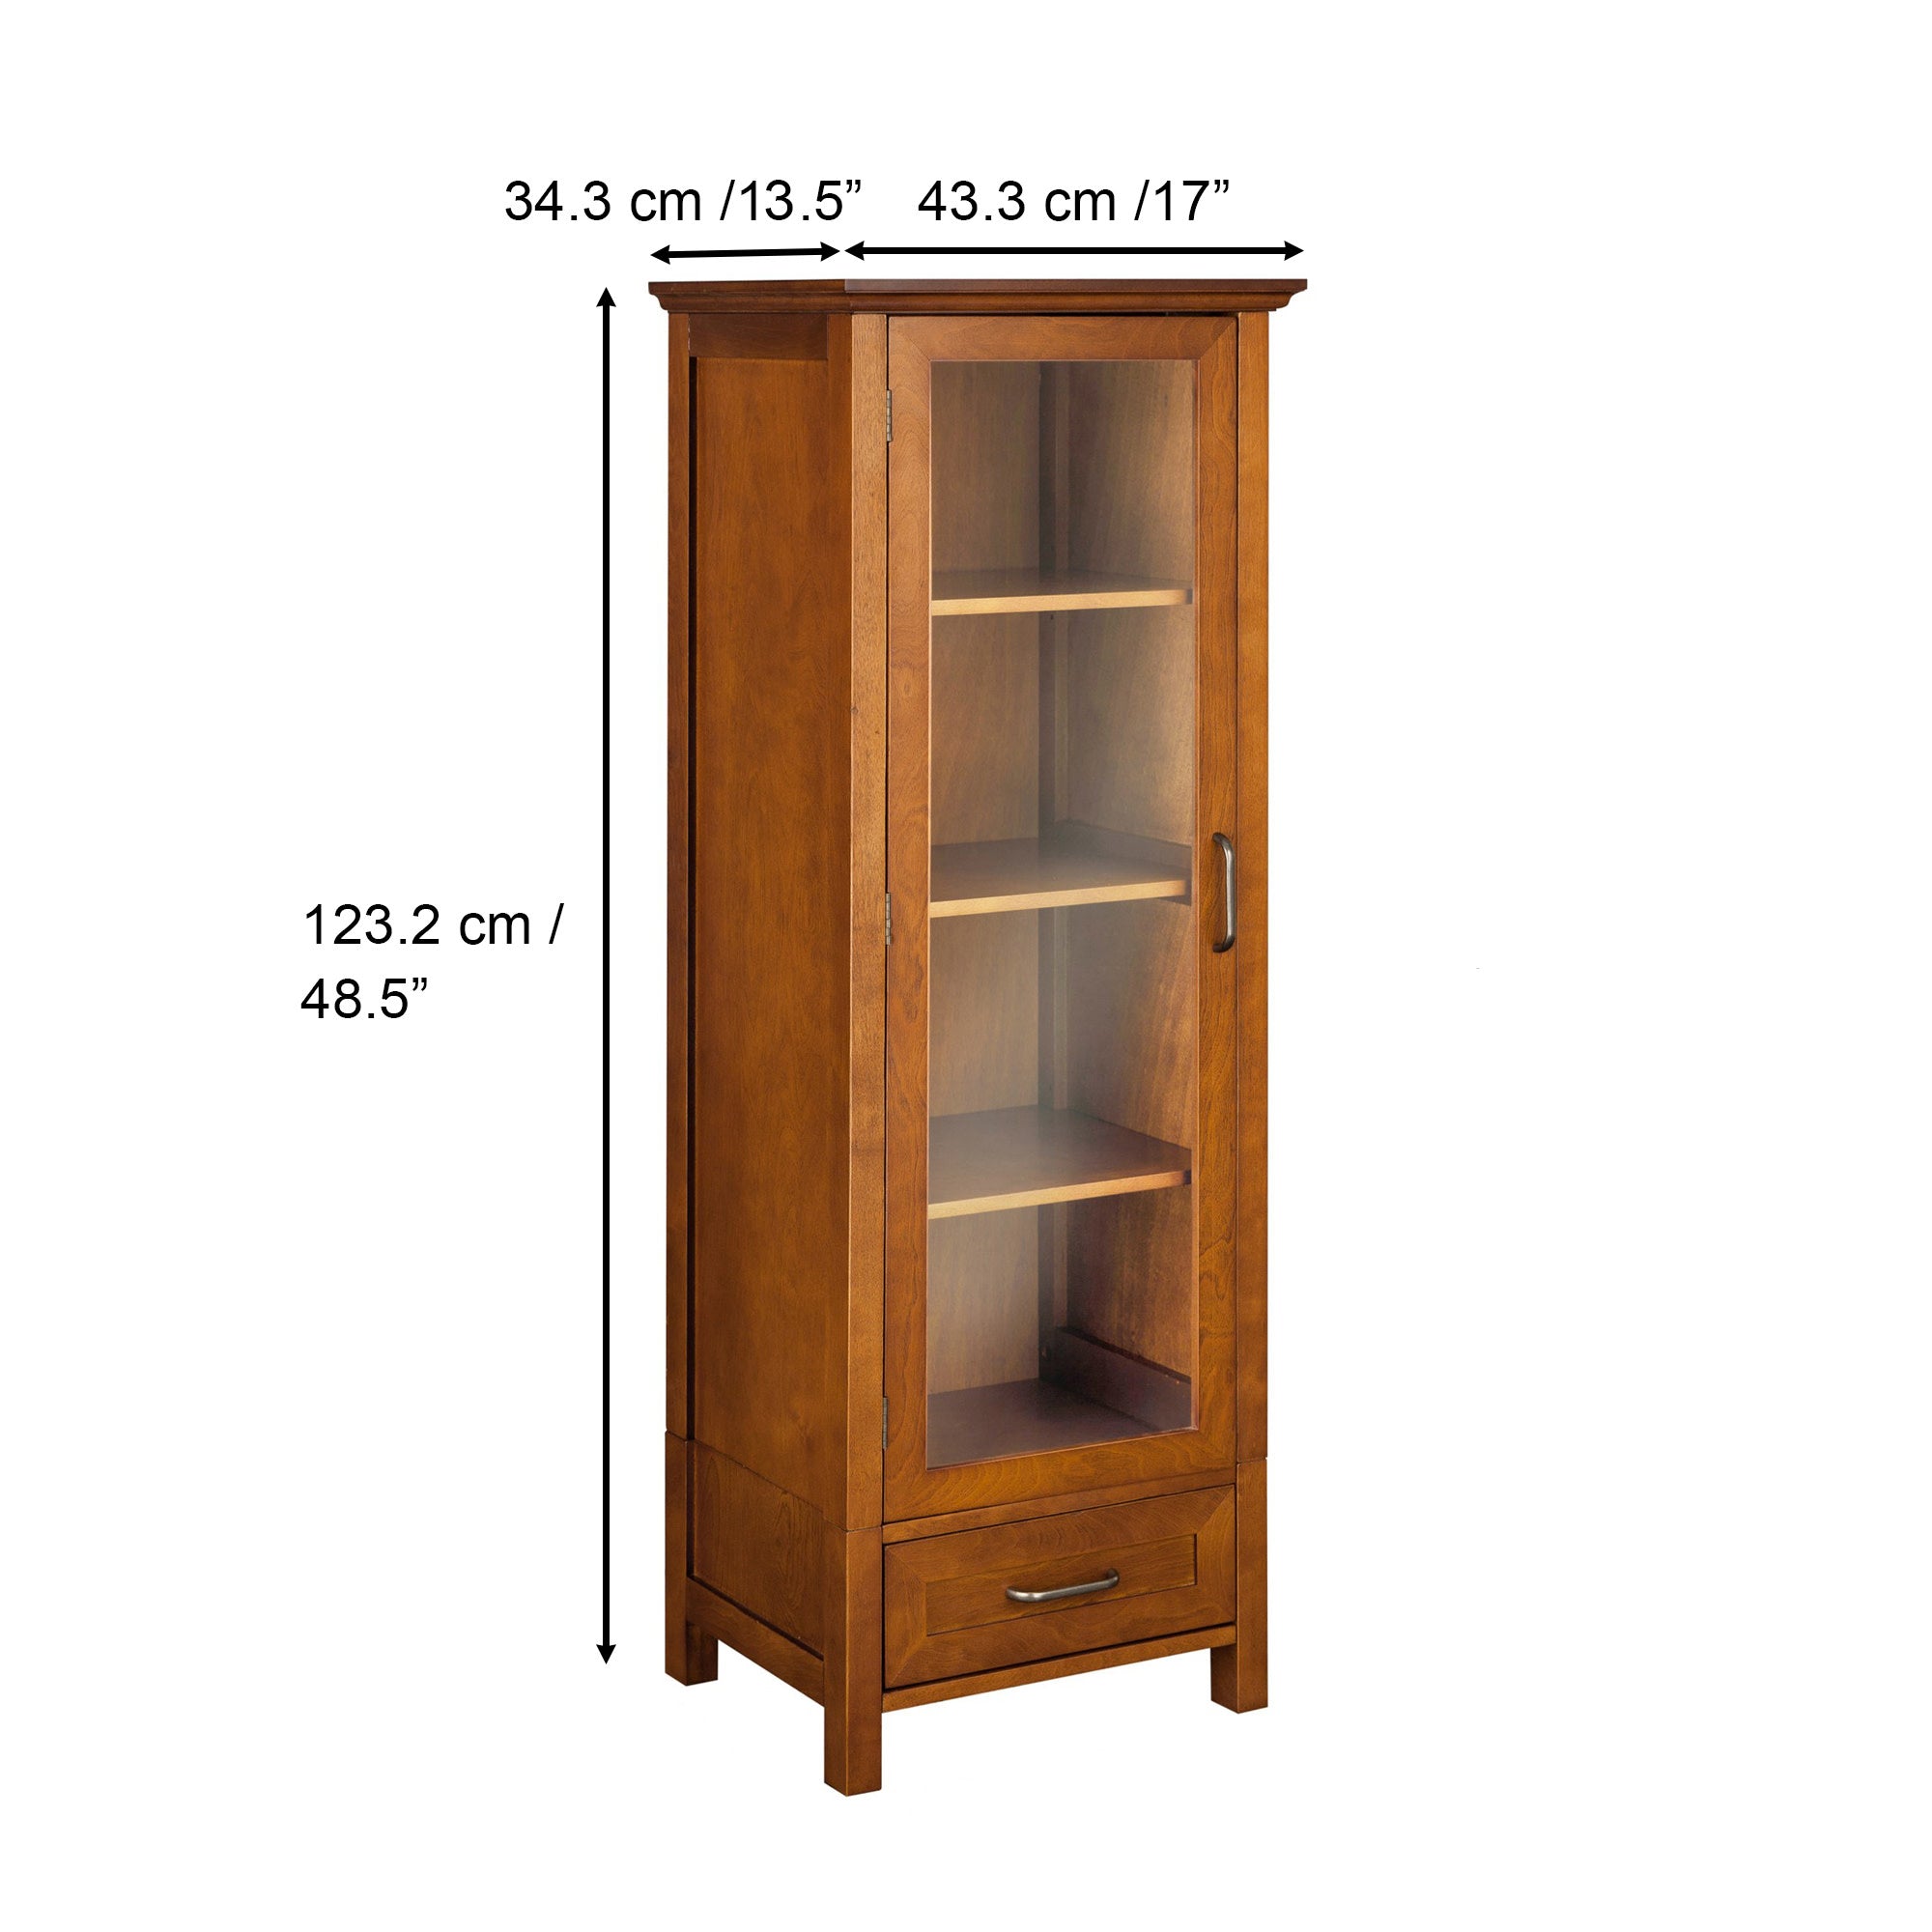 Teamson Home Avery Wooden Linen Tower Cabinet with Storage, Oiled Oak